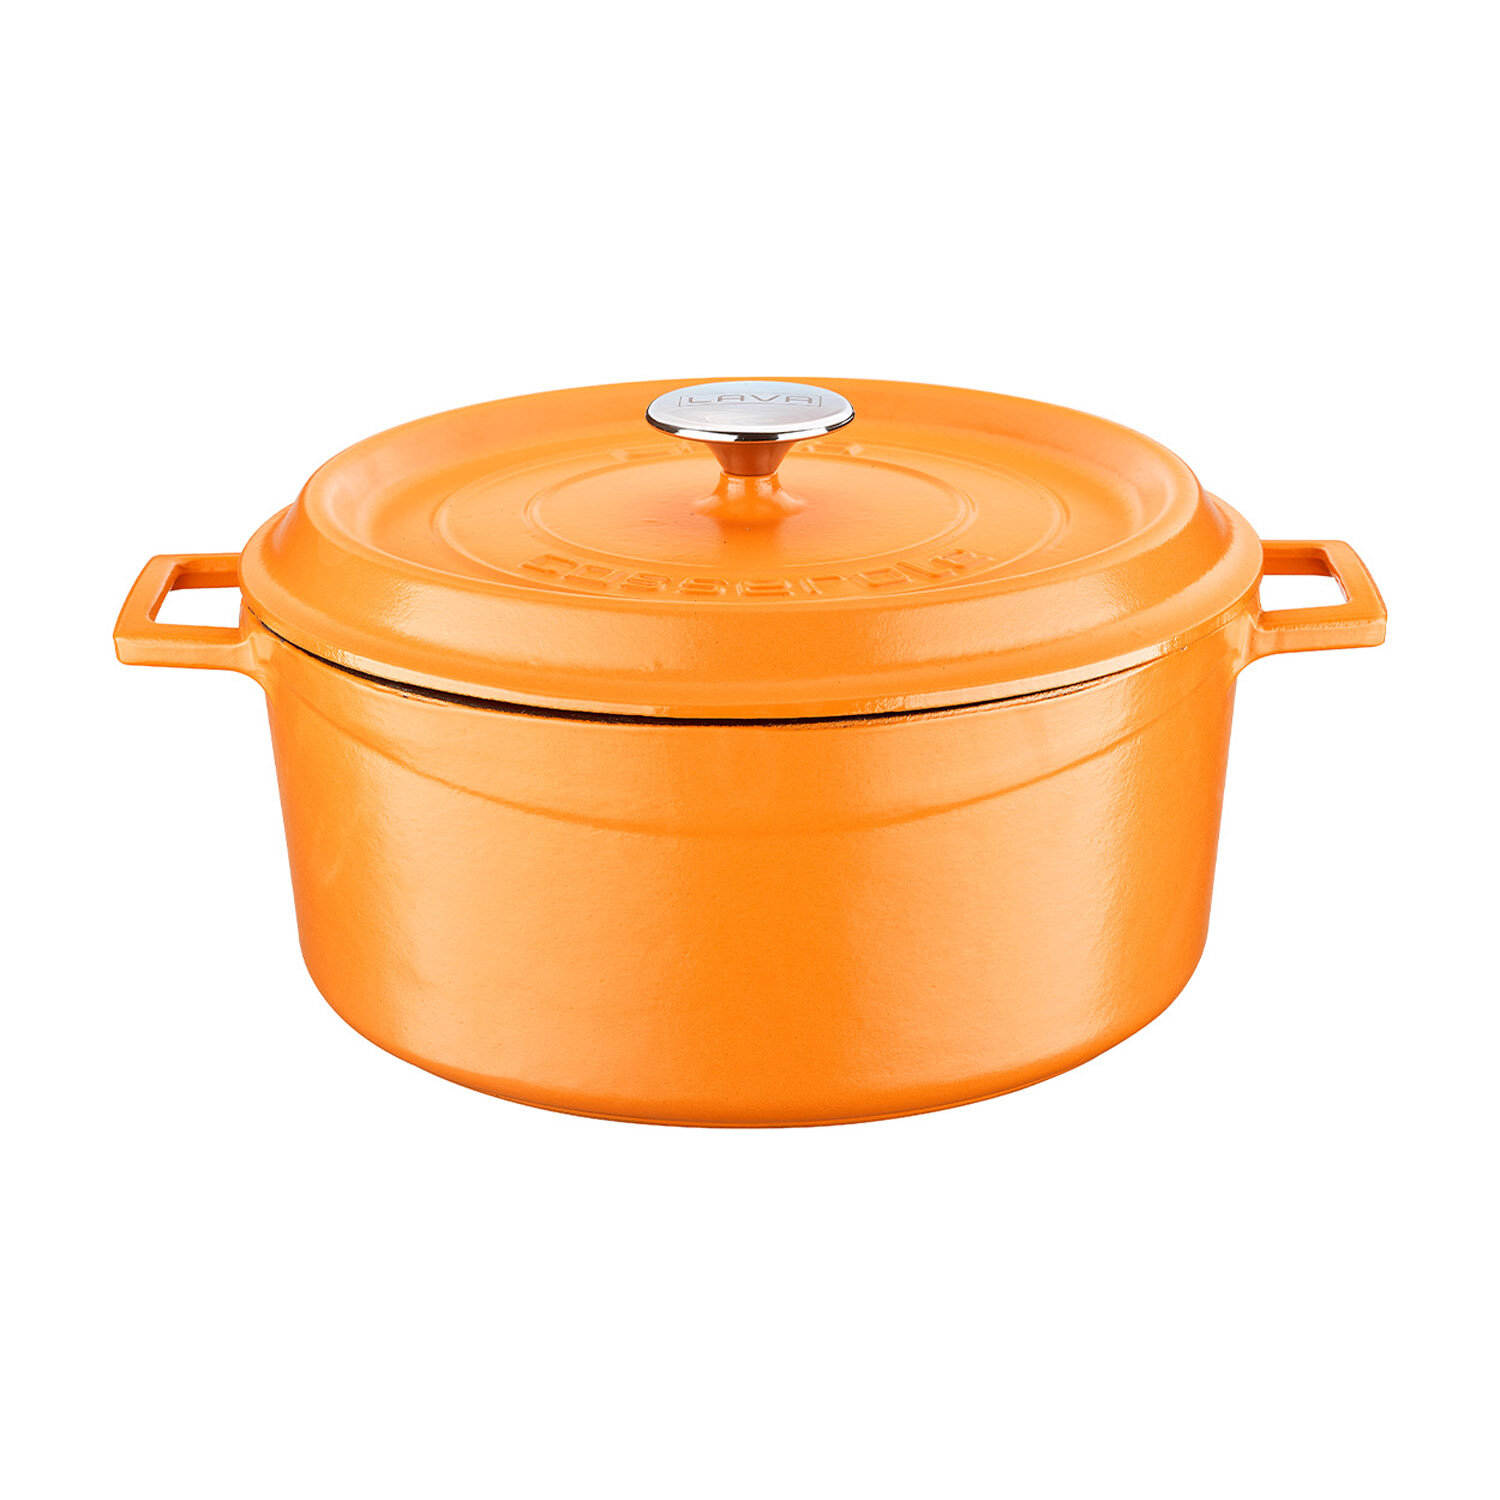 BergHOFF Neo 7qt Cast Iron Round Covered Dutch Oven - Grey